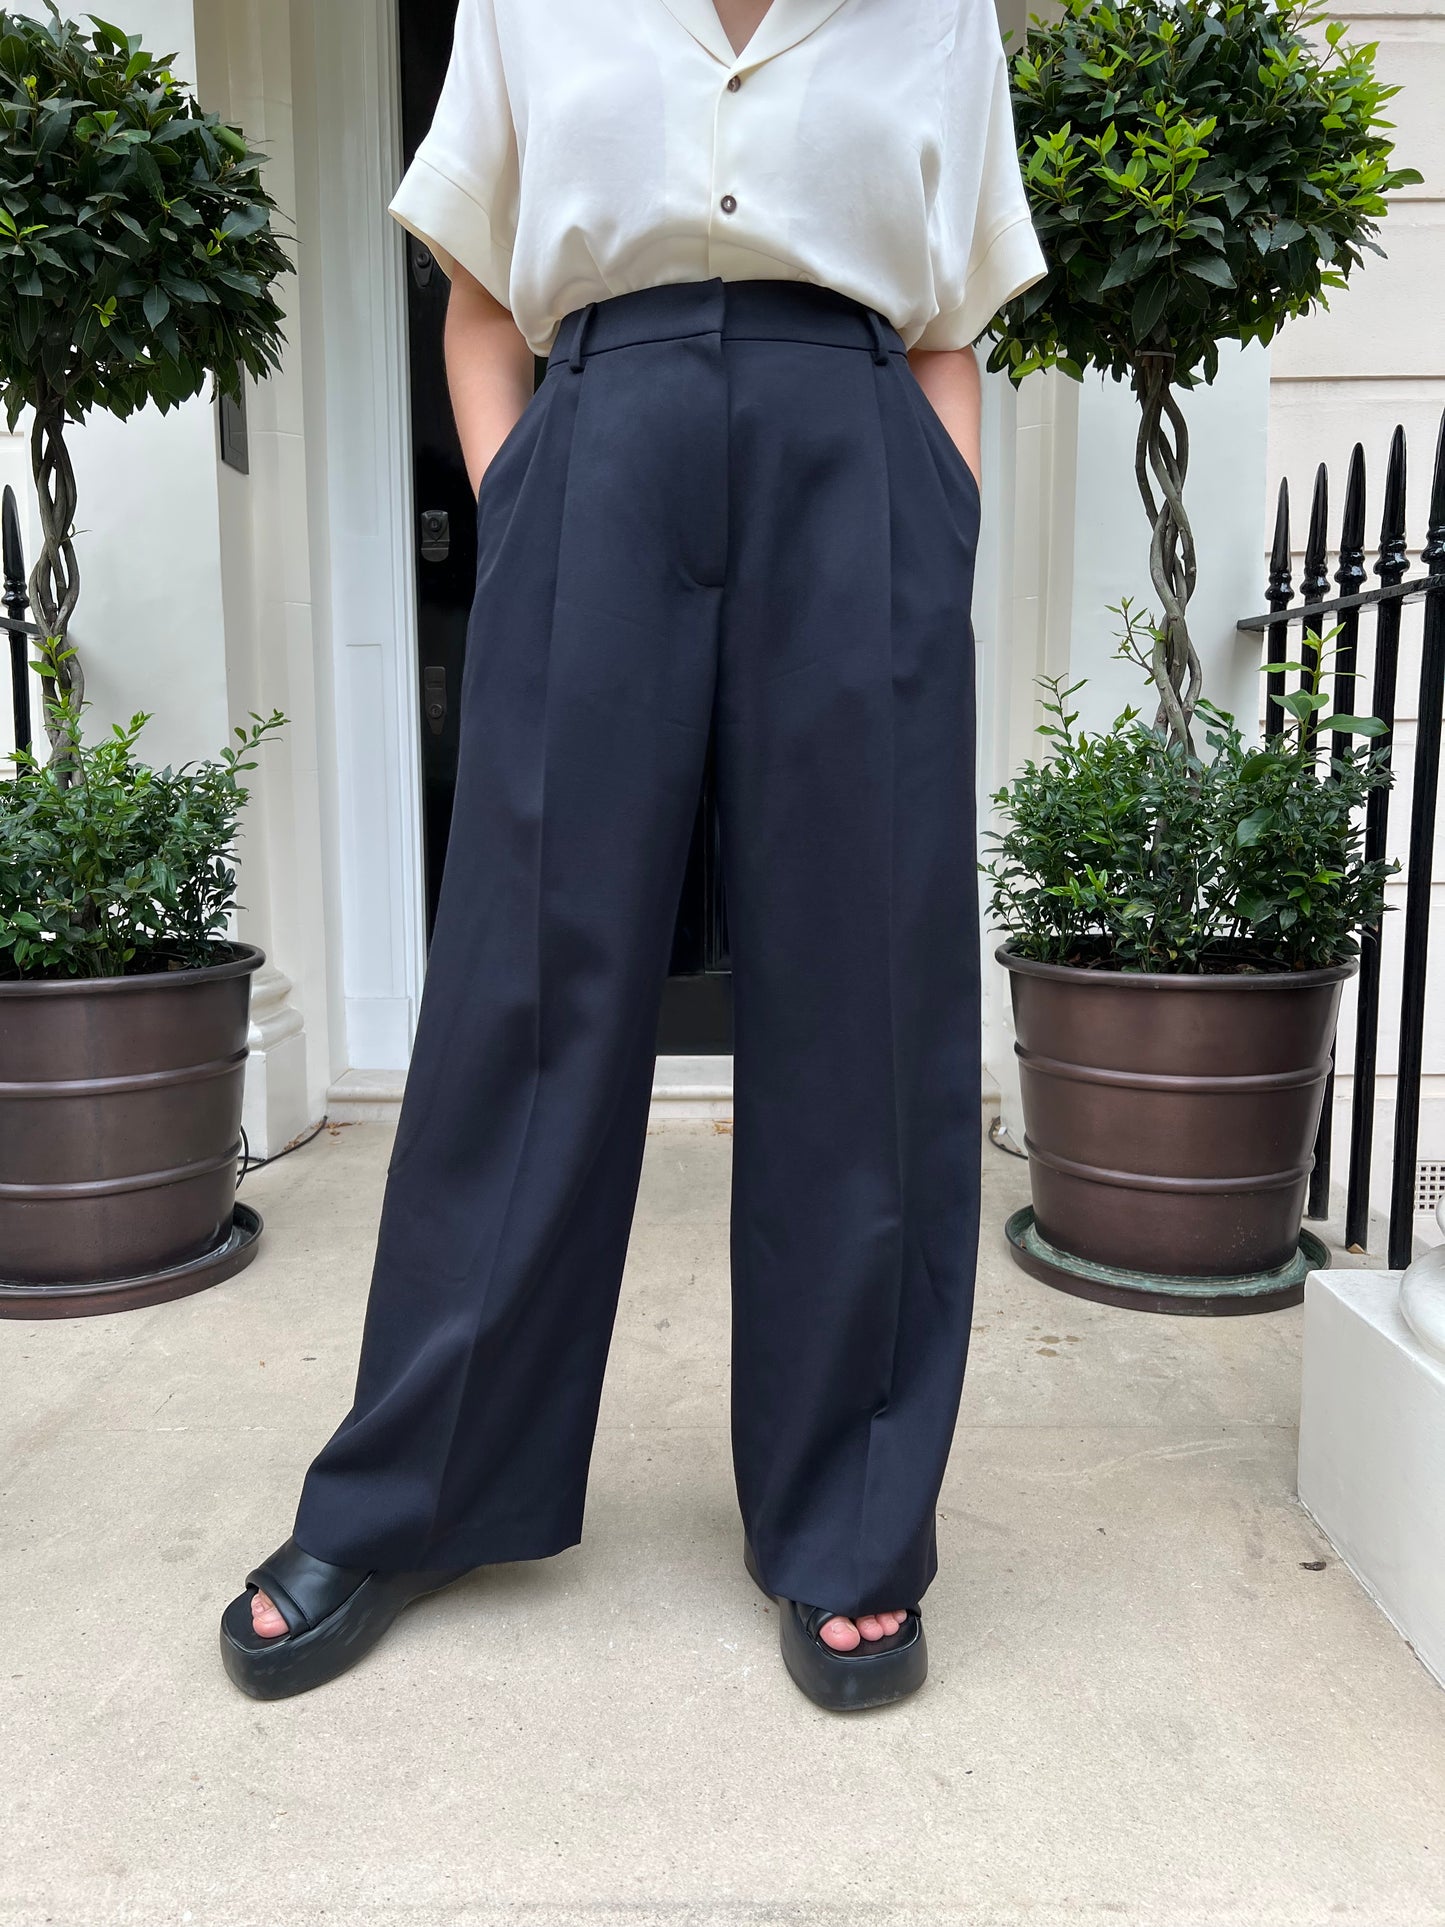 Bella Loves Patterns Billy Trousers in Tencel Stretch Twill and Libert –  Sew Me Sunshine